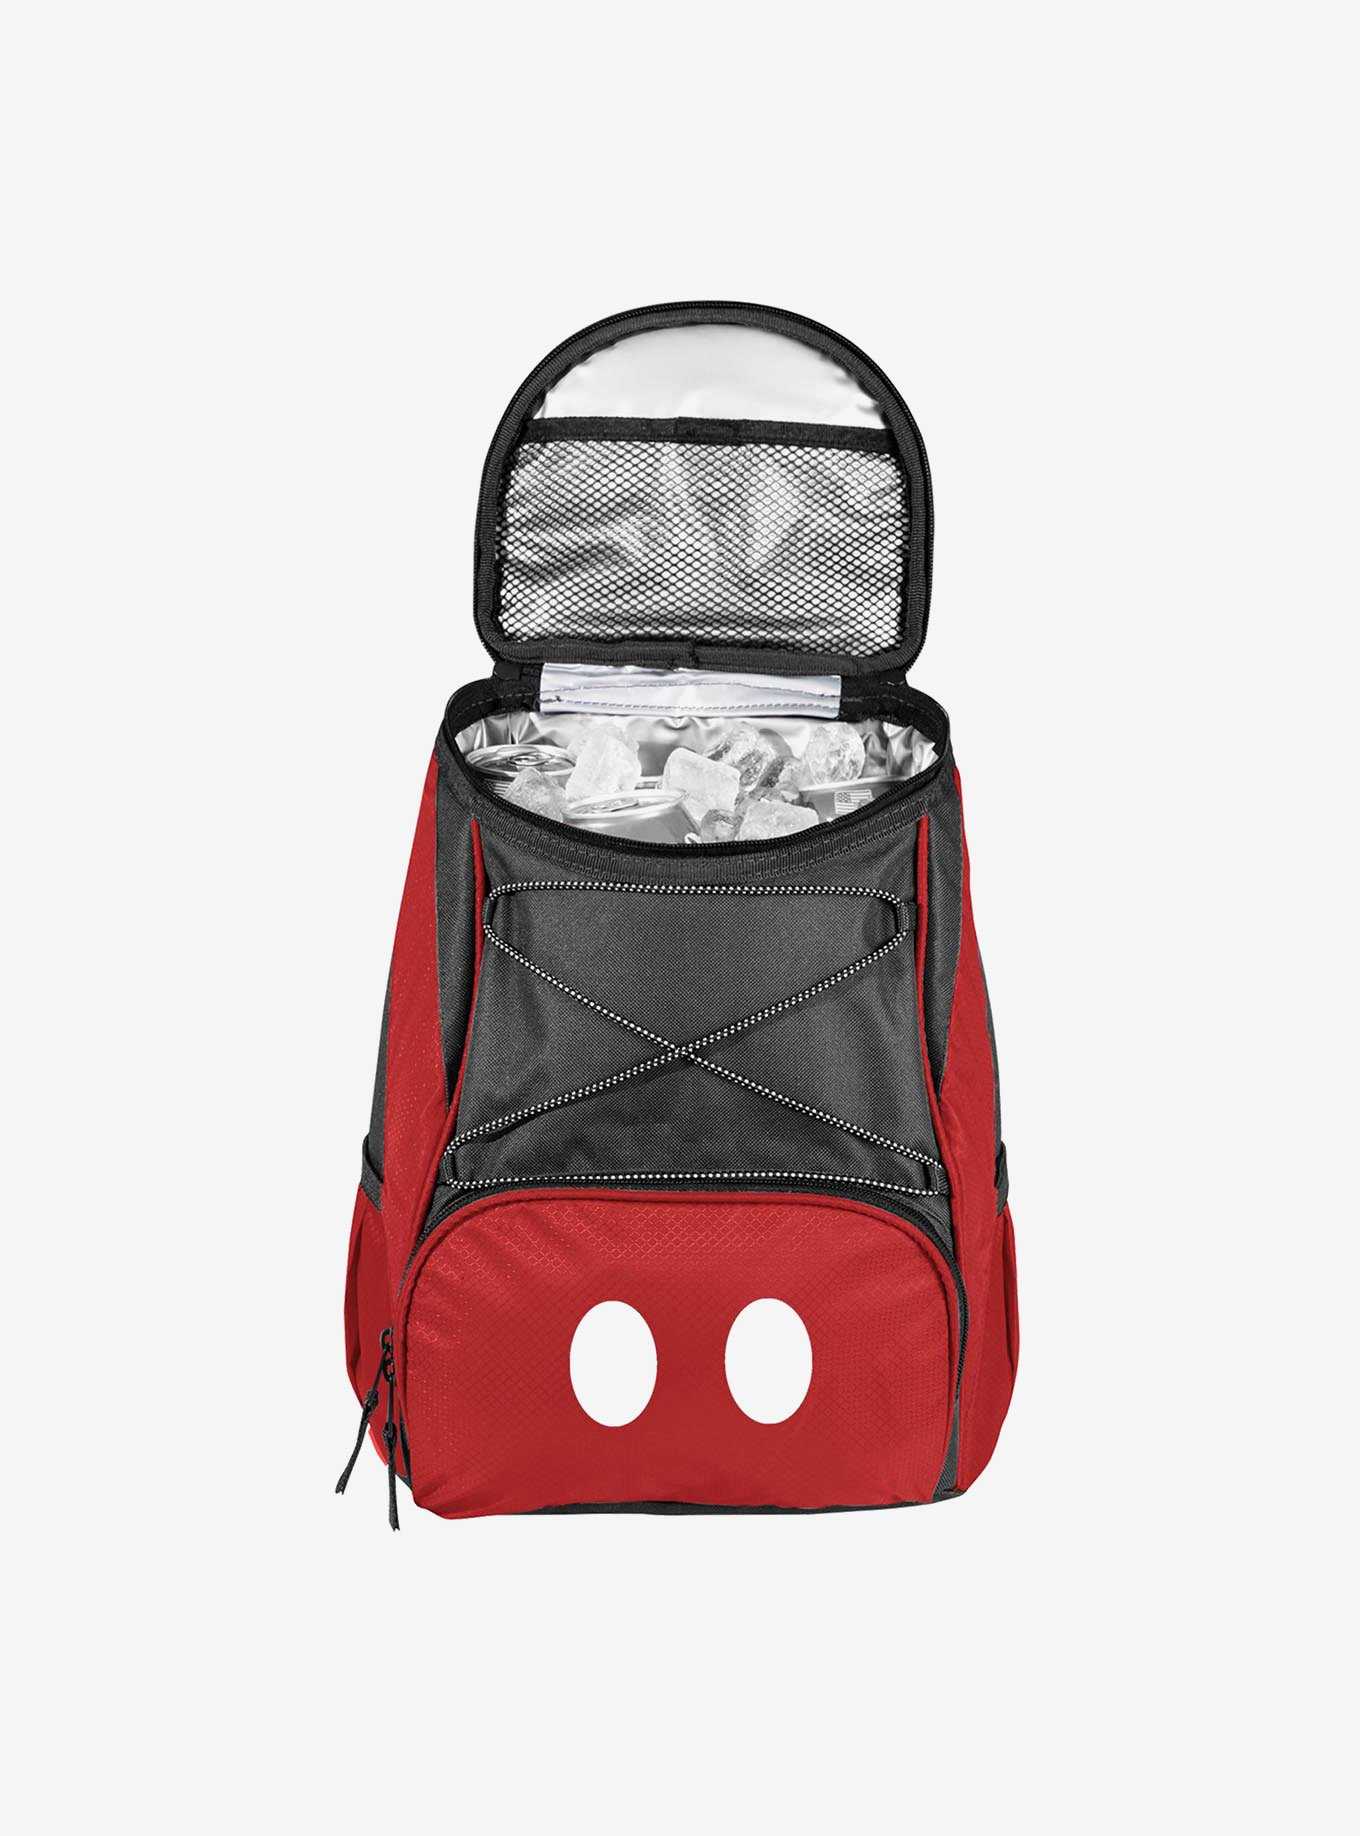 Disney Mickey Mouse Cooler Backpack, , hi-res